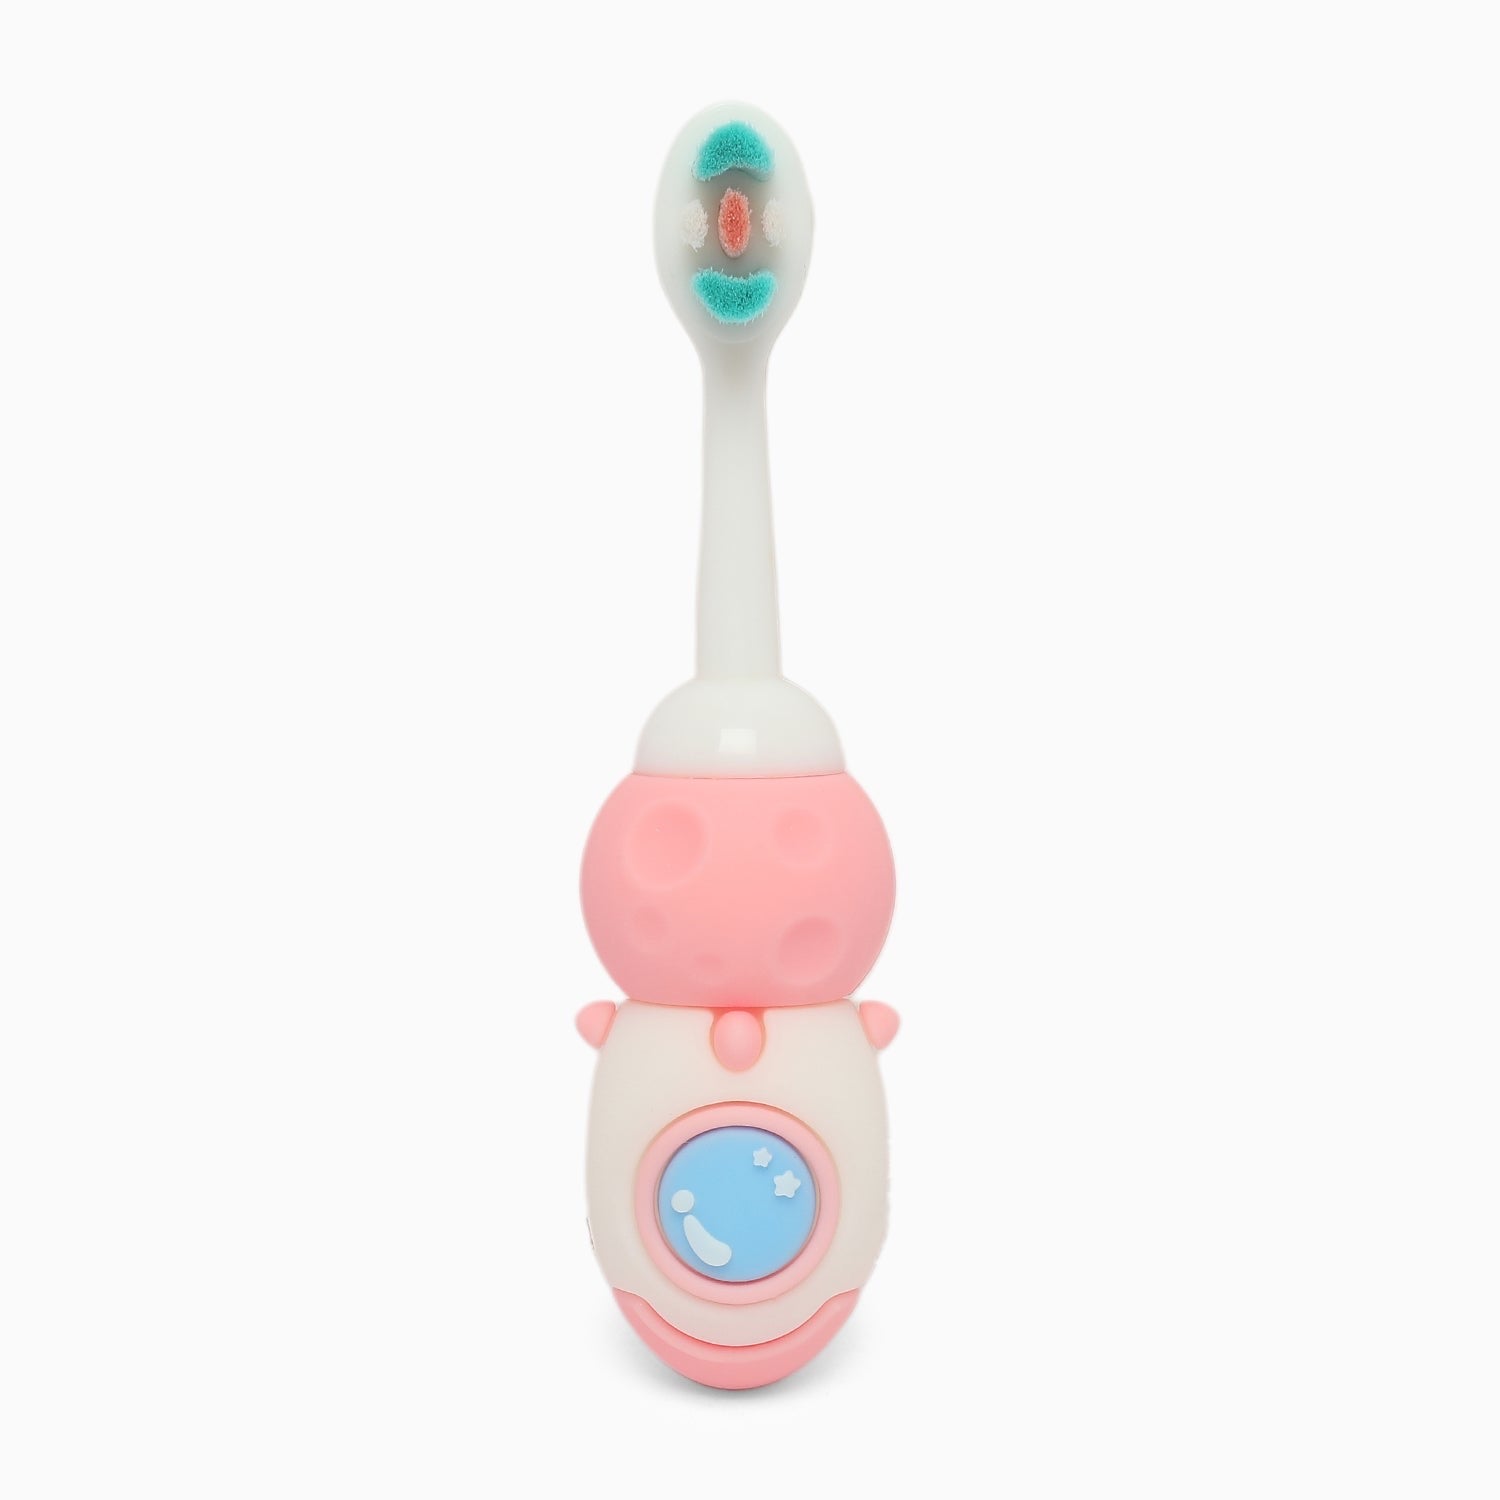 ZORSE baby toothbrush special curated for your child's teeth in style 2-7 year olds (random space-print)